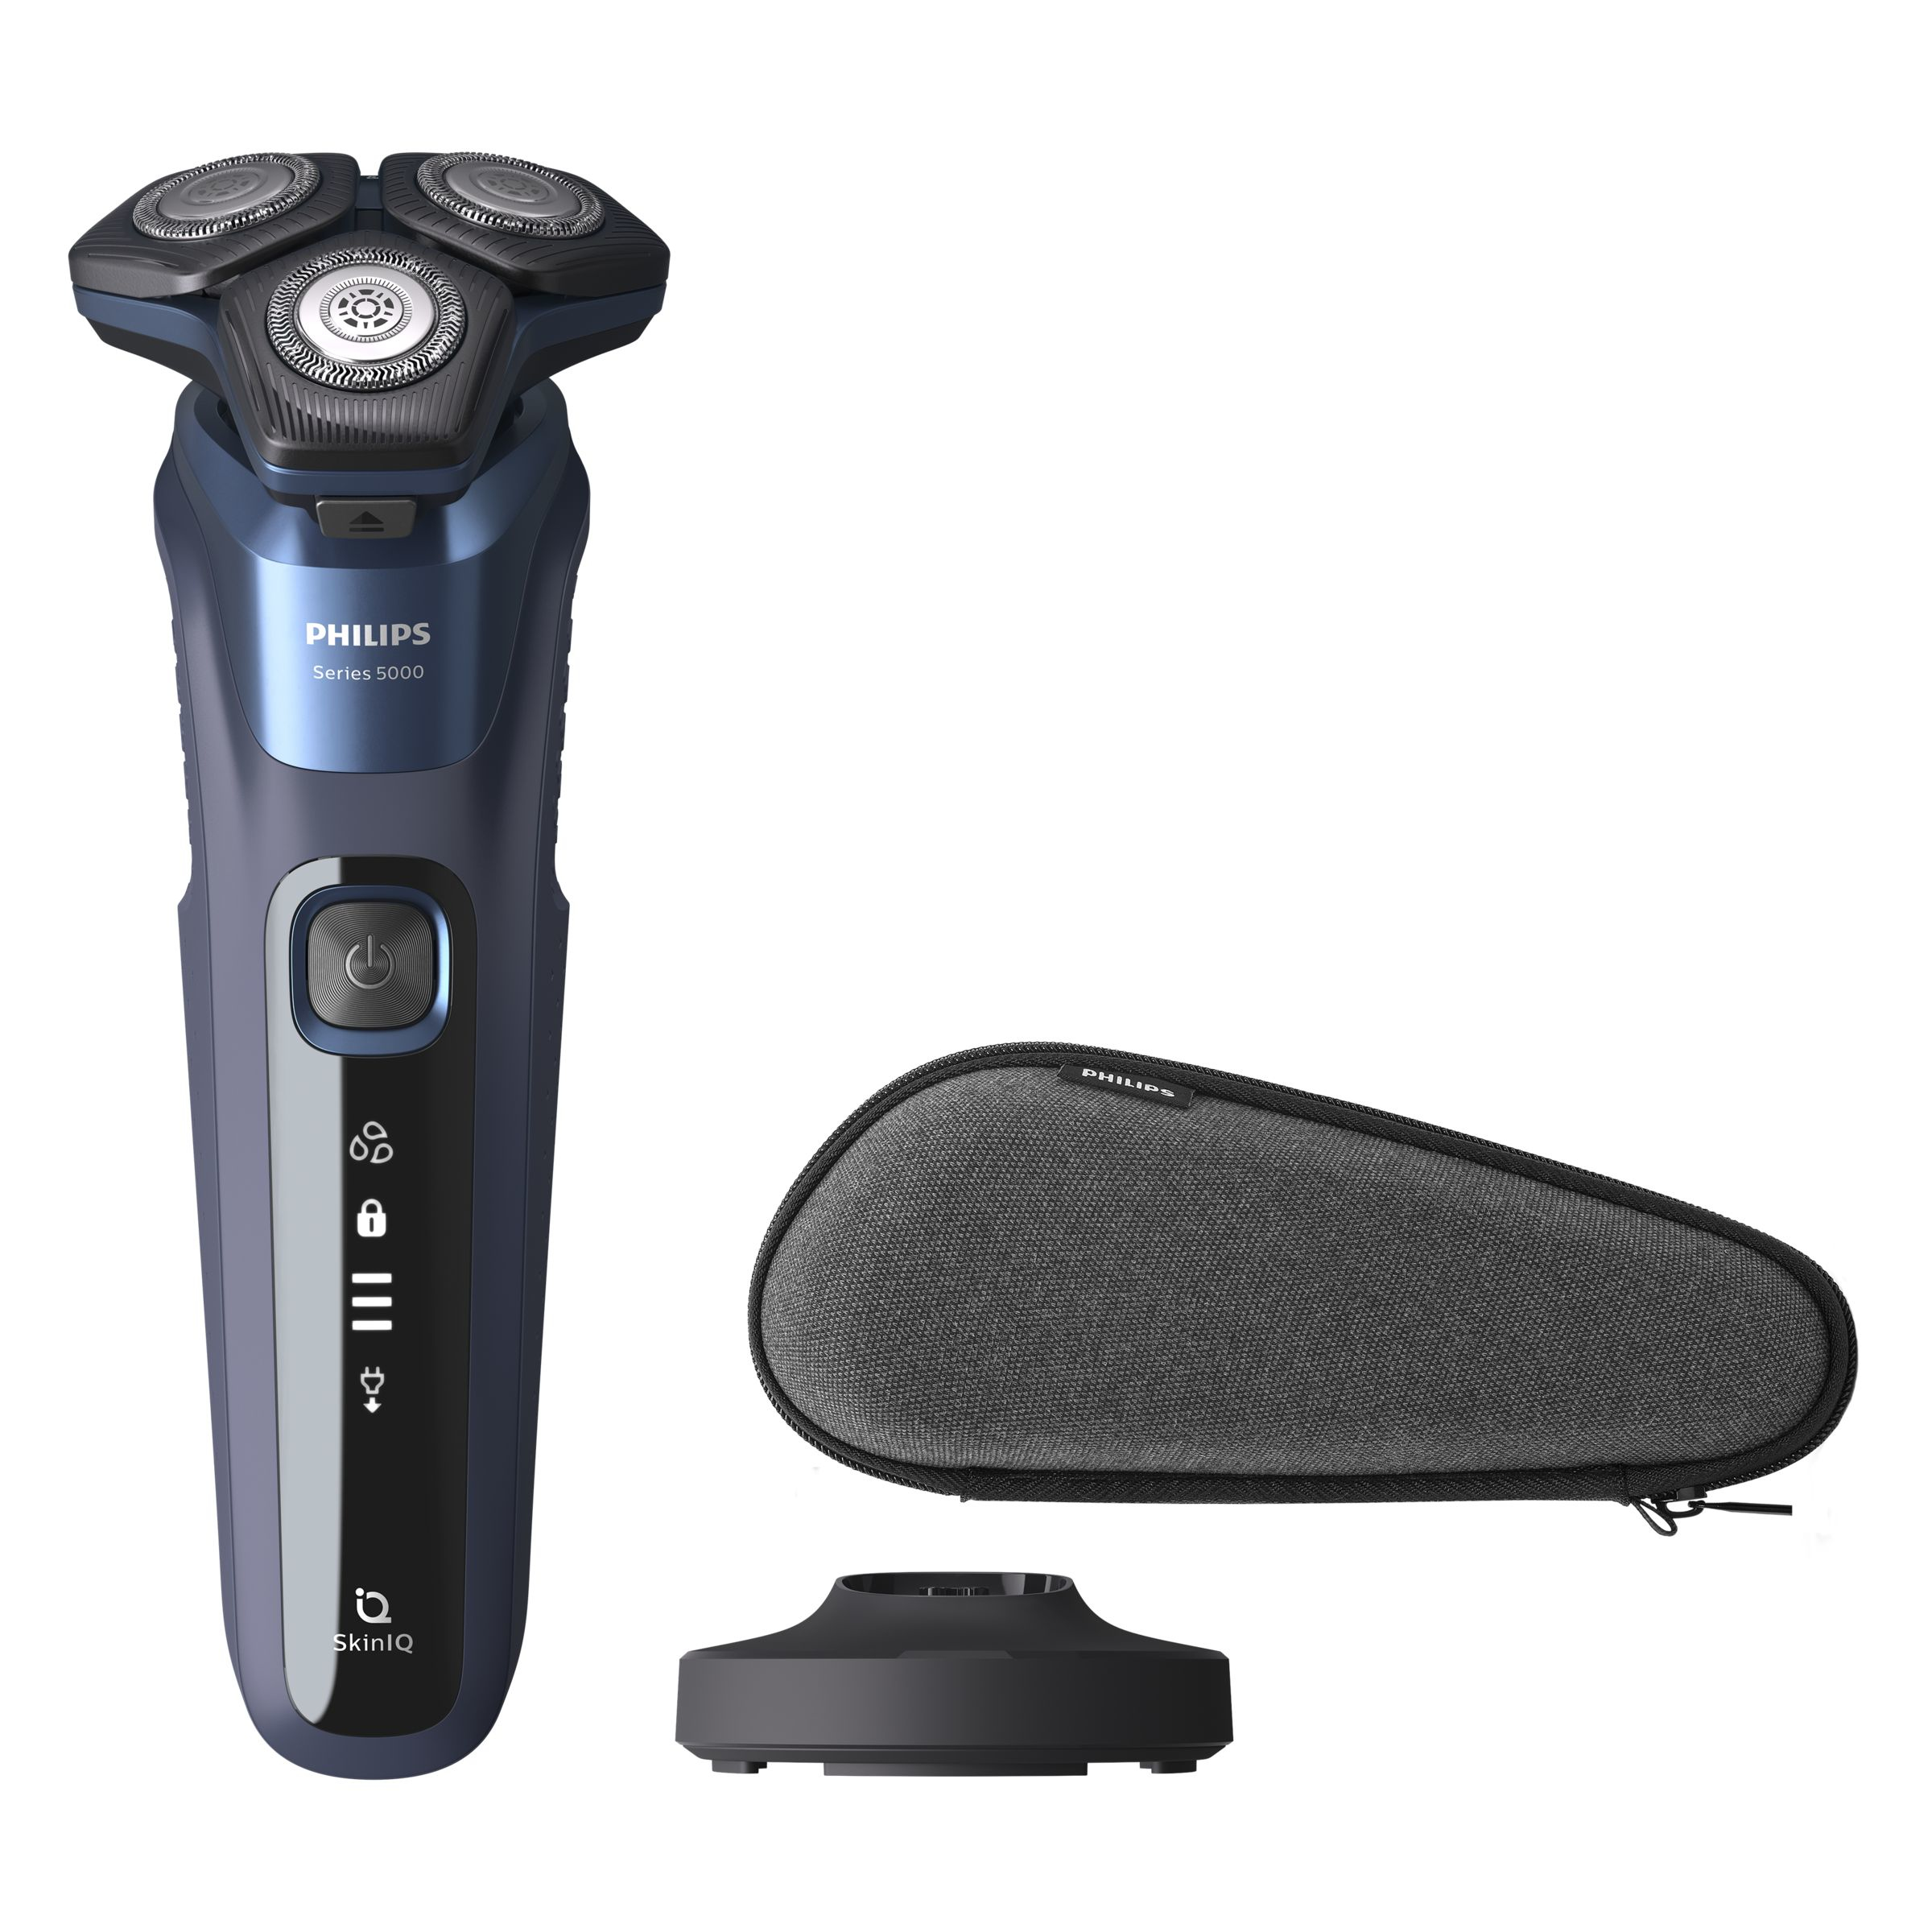  S5585/35 Shaver